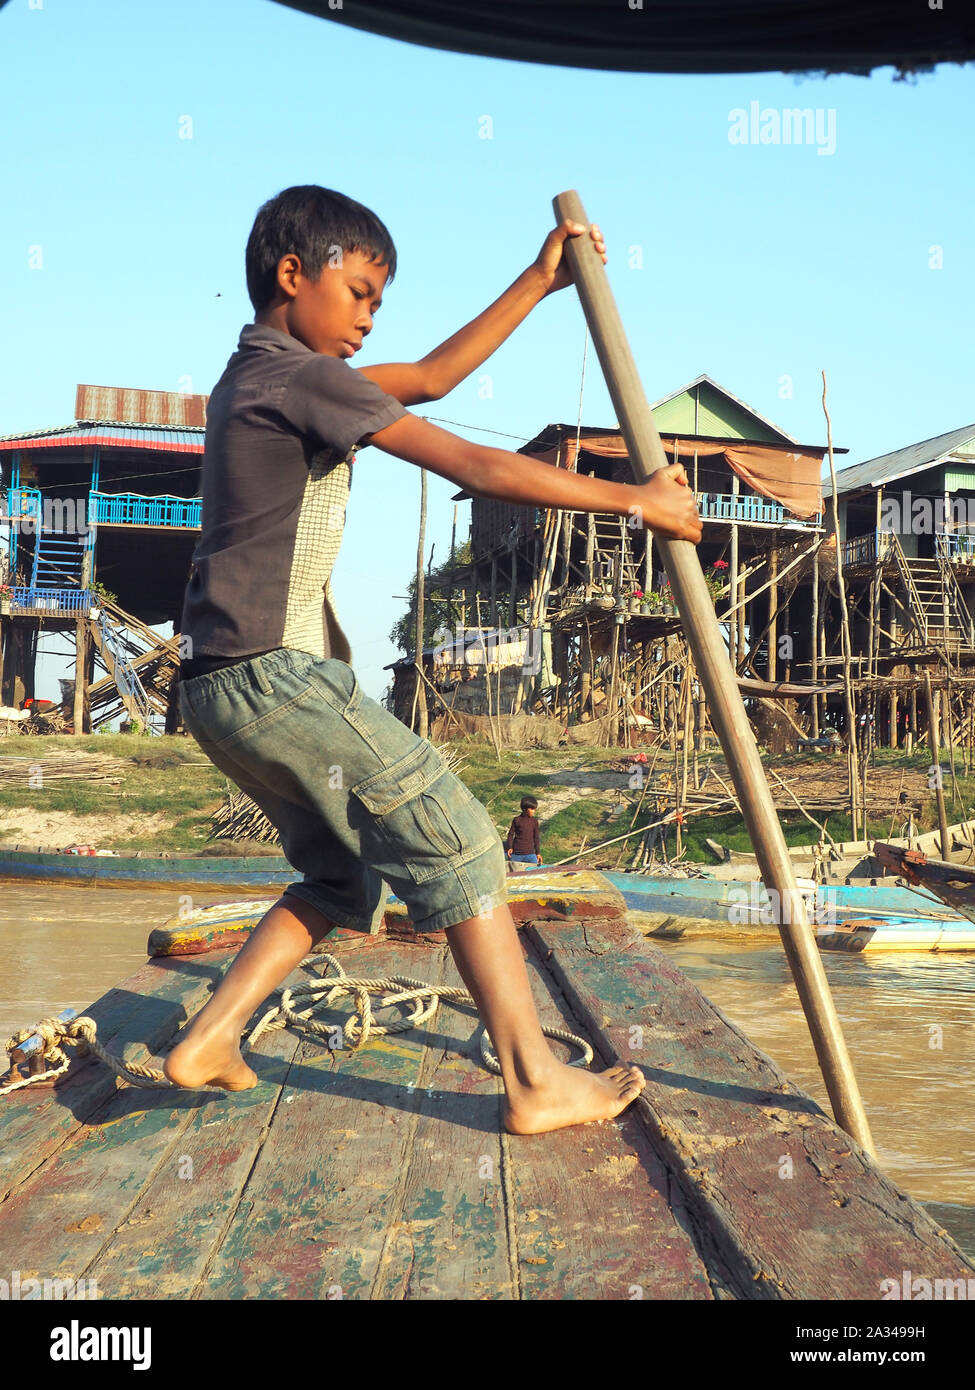 poor cambodian boy working on a boat in floating village Stock Photo